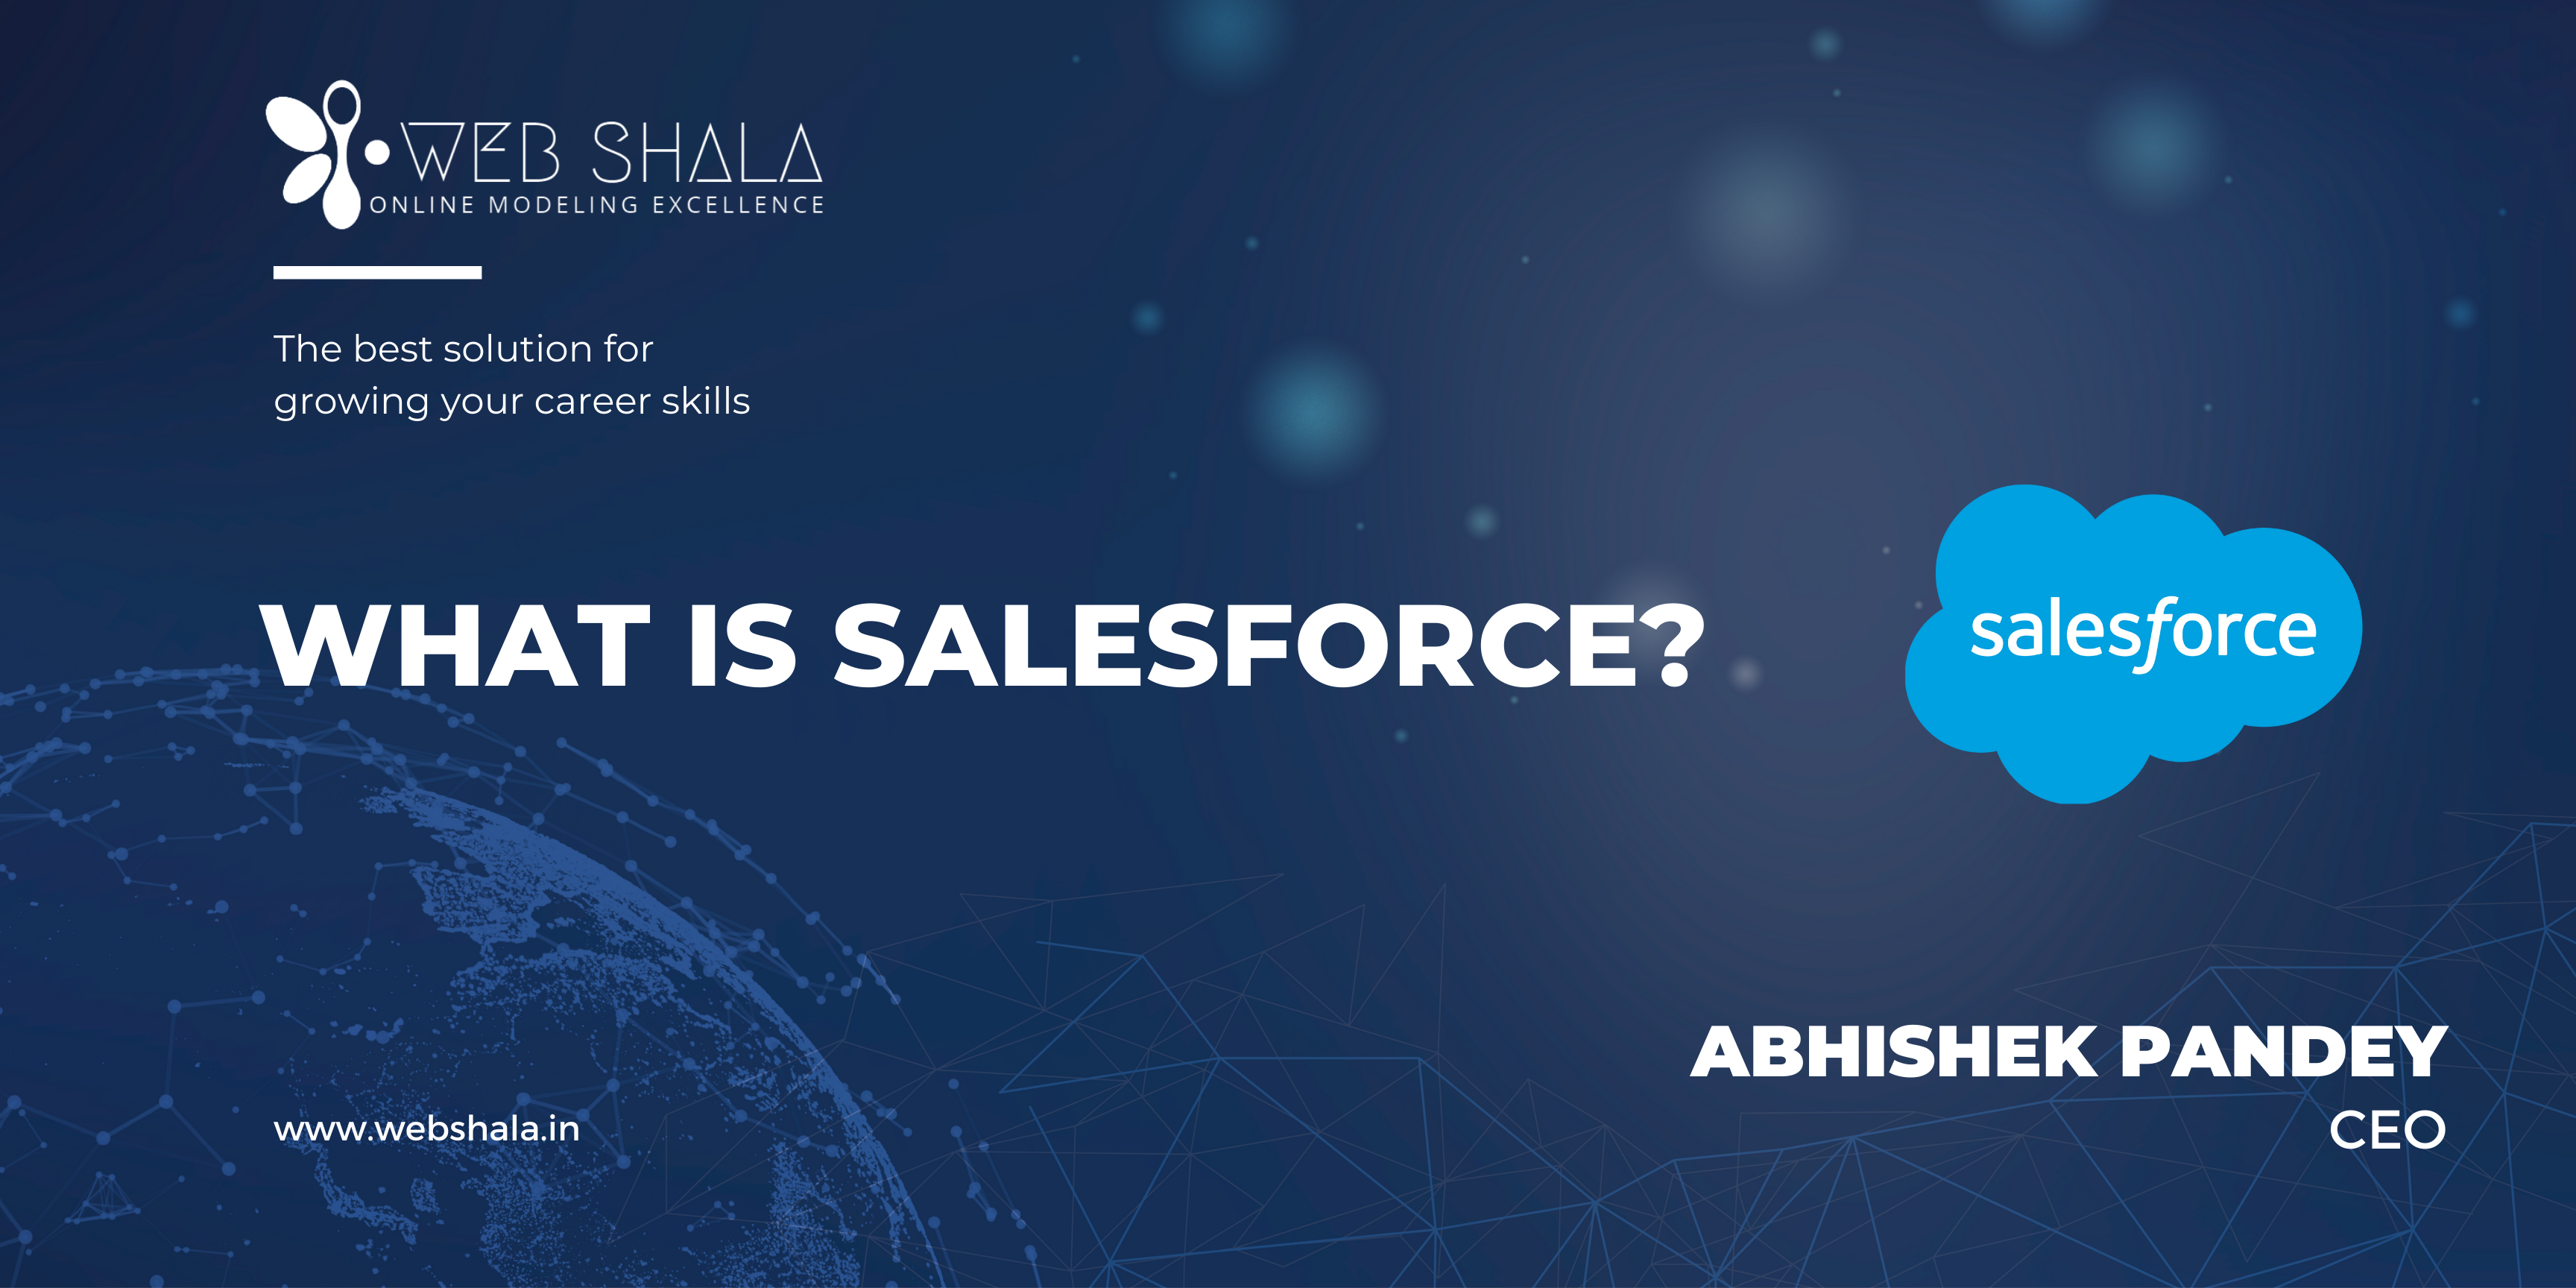 WHAT IS SALESFORCE?